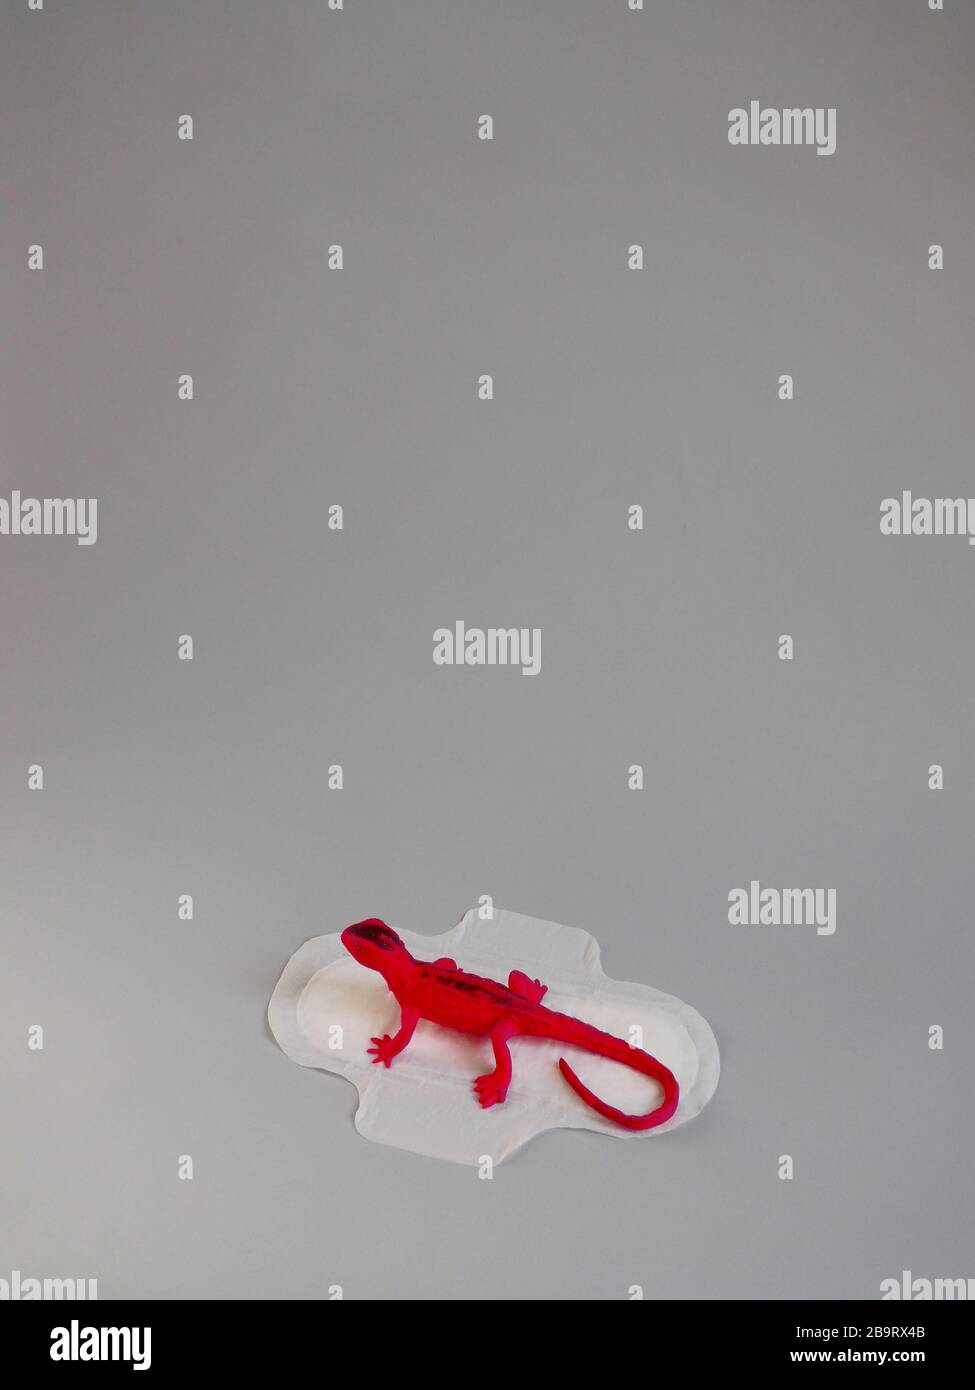 Menstrual pad with red lizard on gray background. Minimalist still life photography concept. Women critical days, gynecological menstruation cycle. Stock Photo